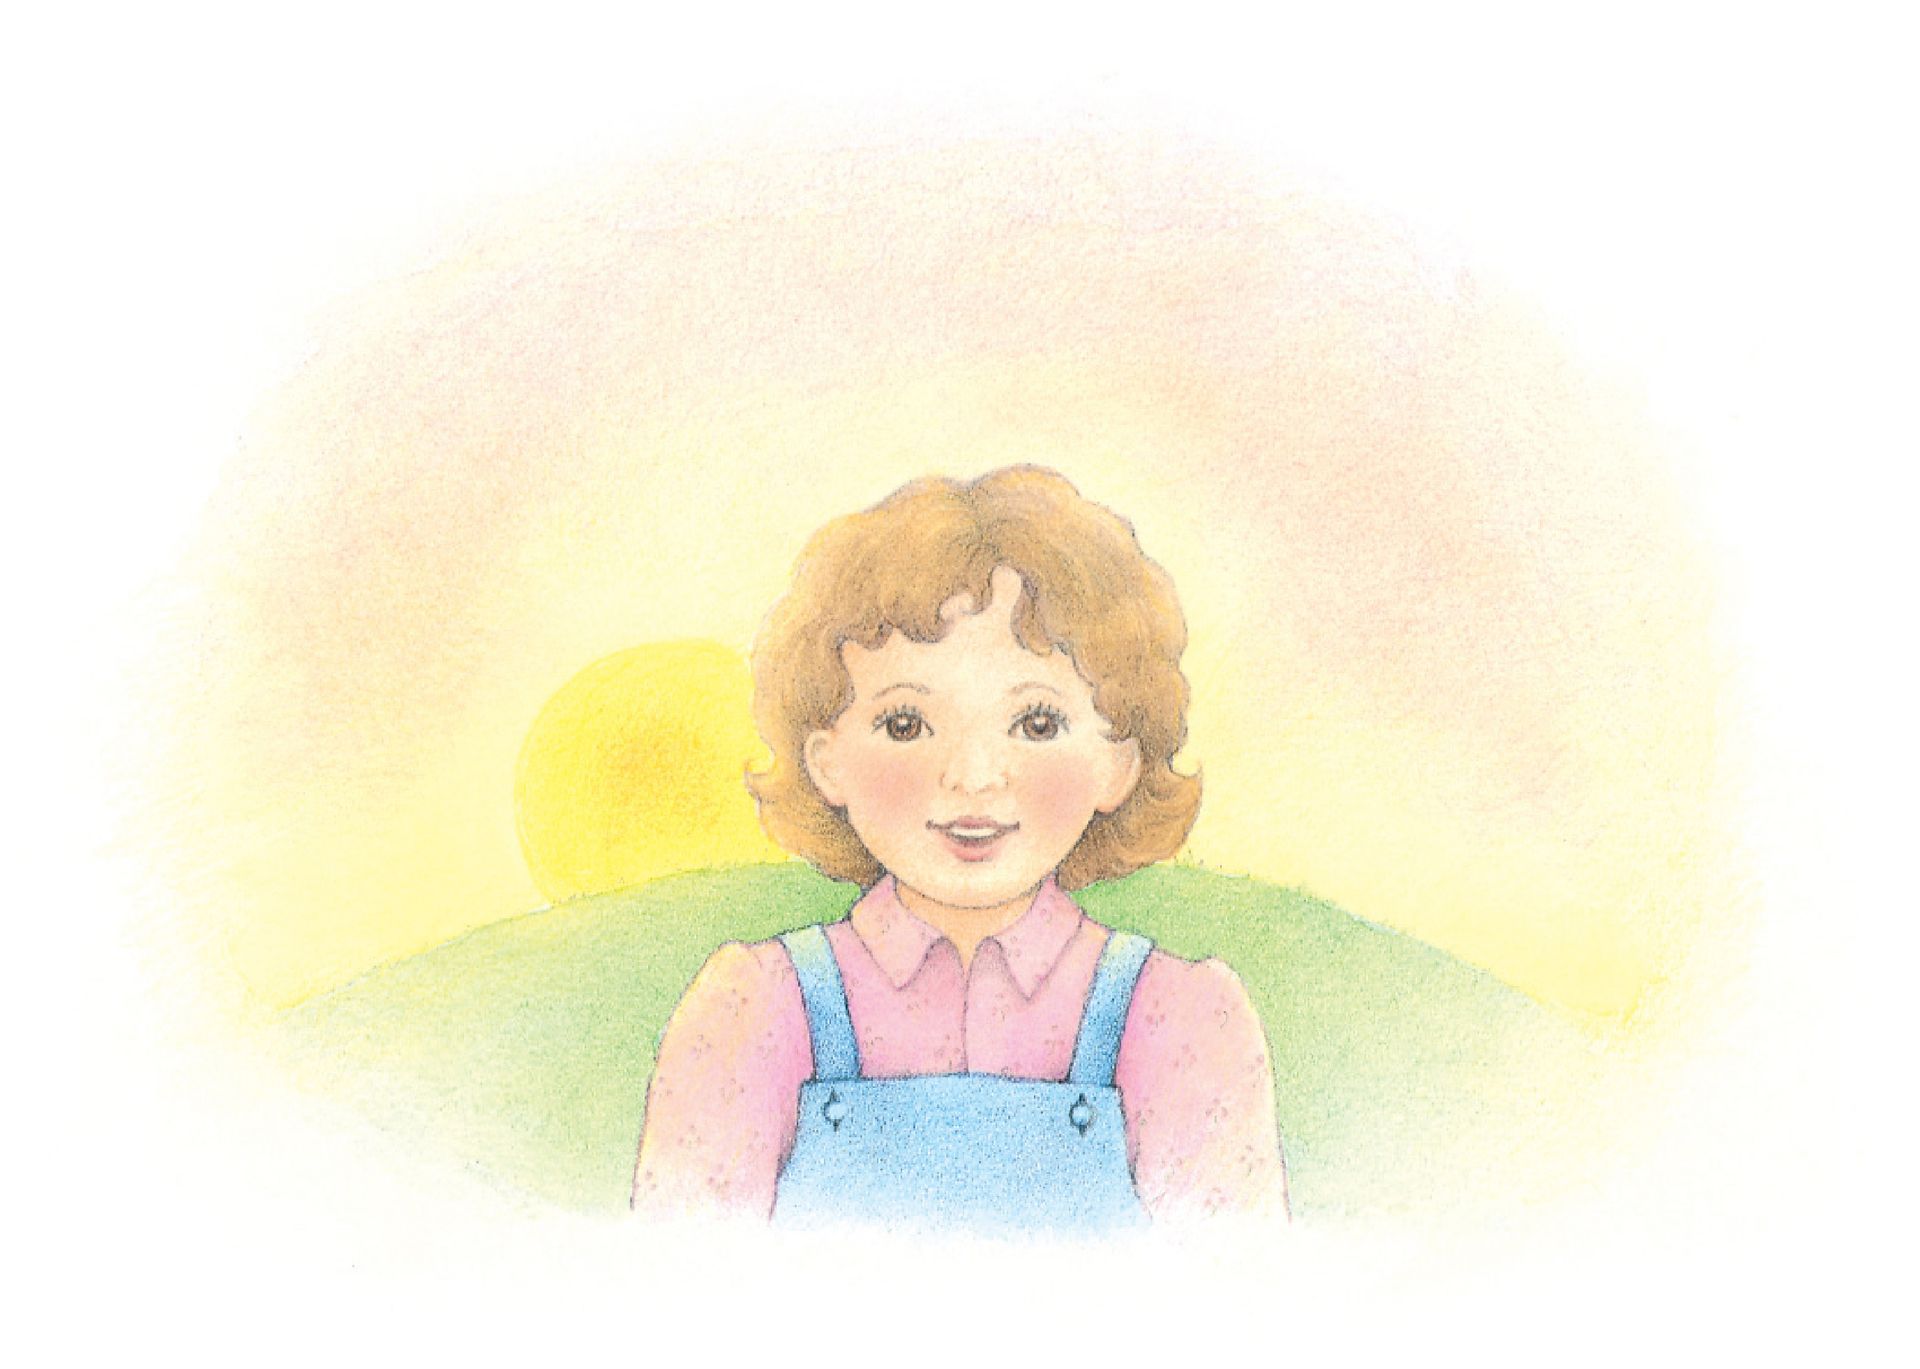 A smiling girl standing in front of a sunrise. From the Children’s Songbook, page 144, “Shine On”; watercolor illustration by Beth Whittaker.